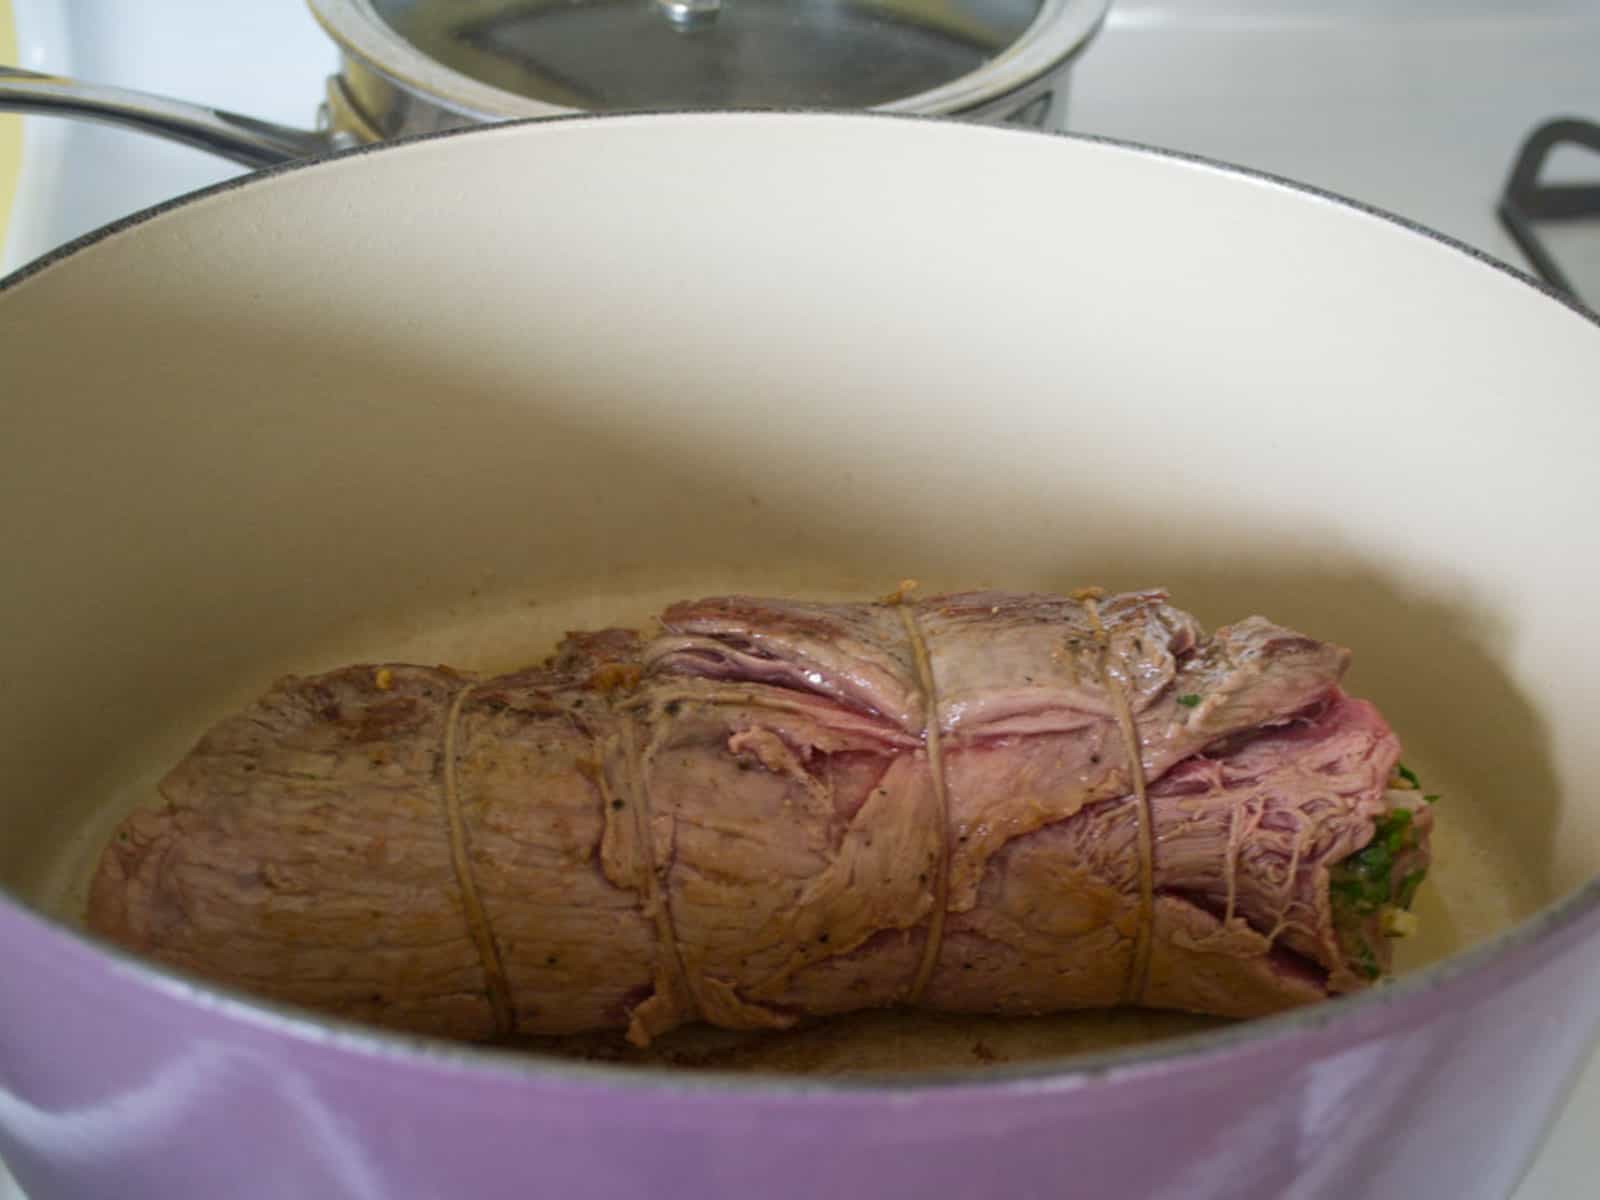 Sear the rolled beef braciole in the Dutch oven until seared on all sides.